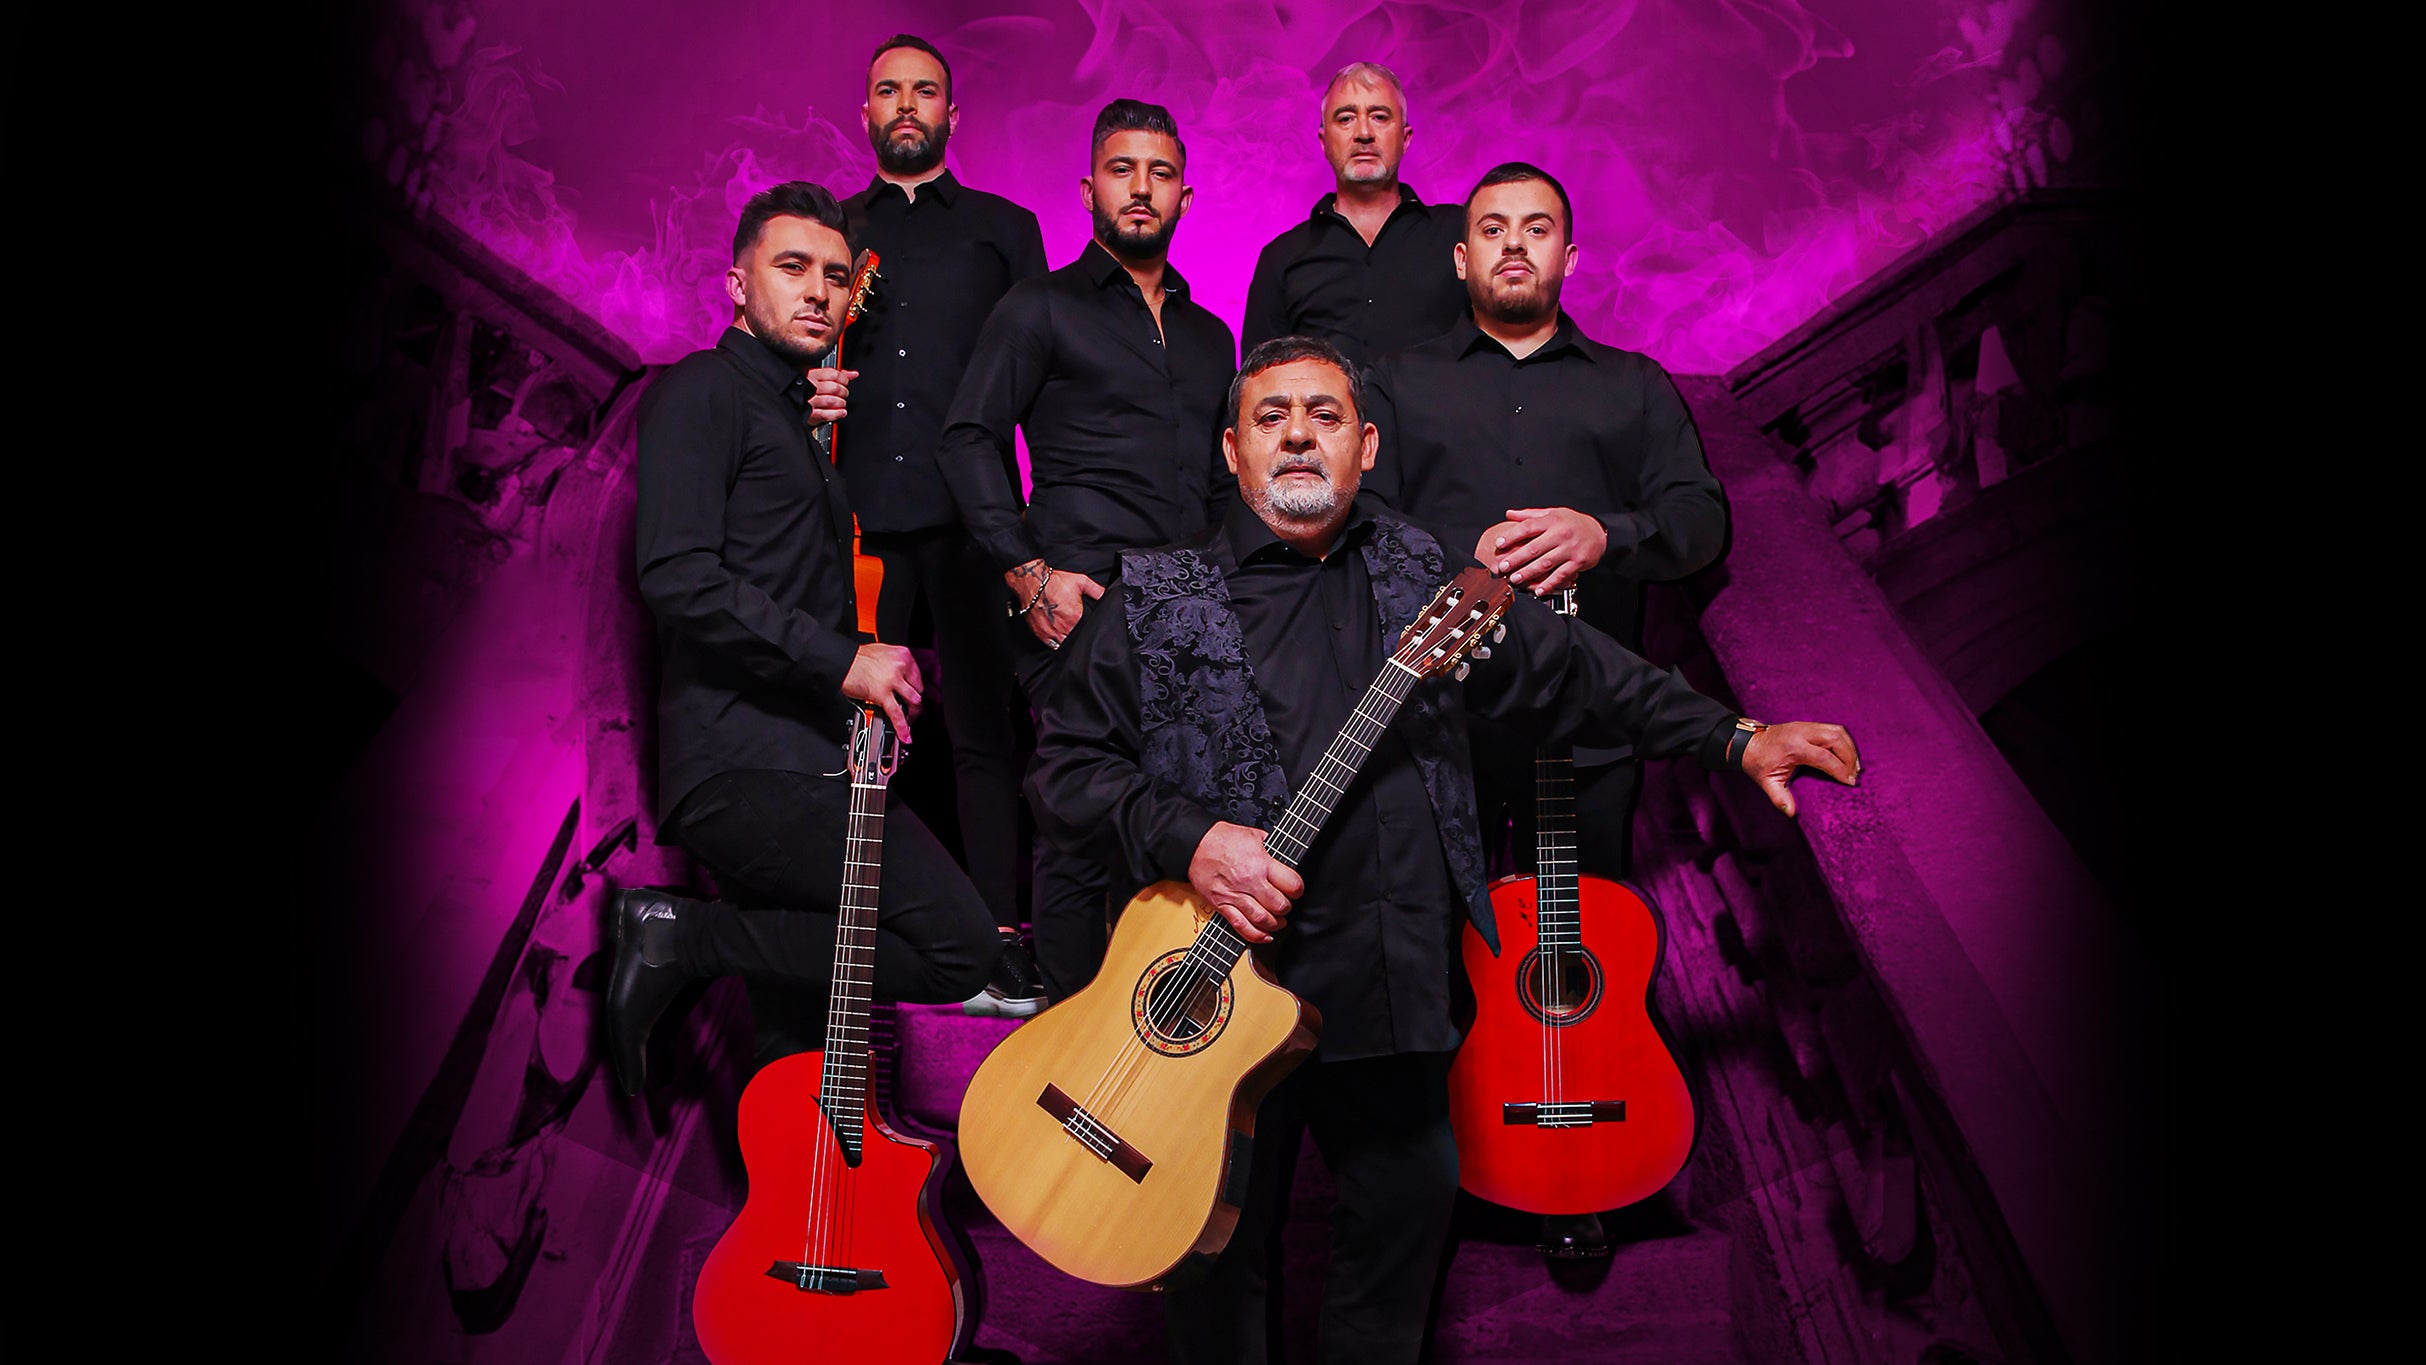 Gipsy Kings featuring Tonino Baliardo: Renaissance Tour presale code for real tickets in Seattle